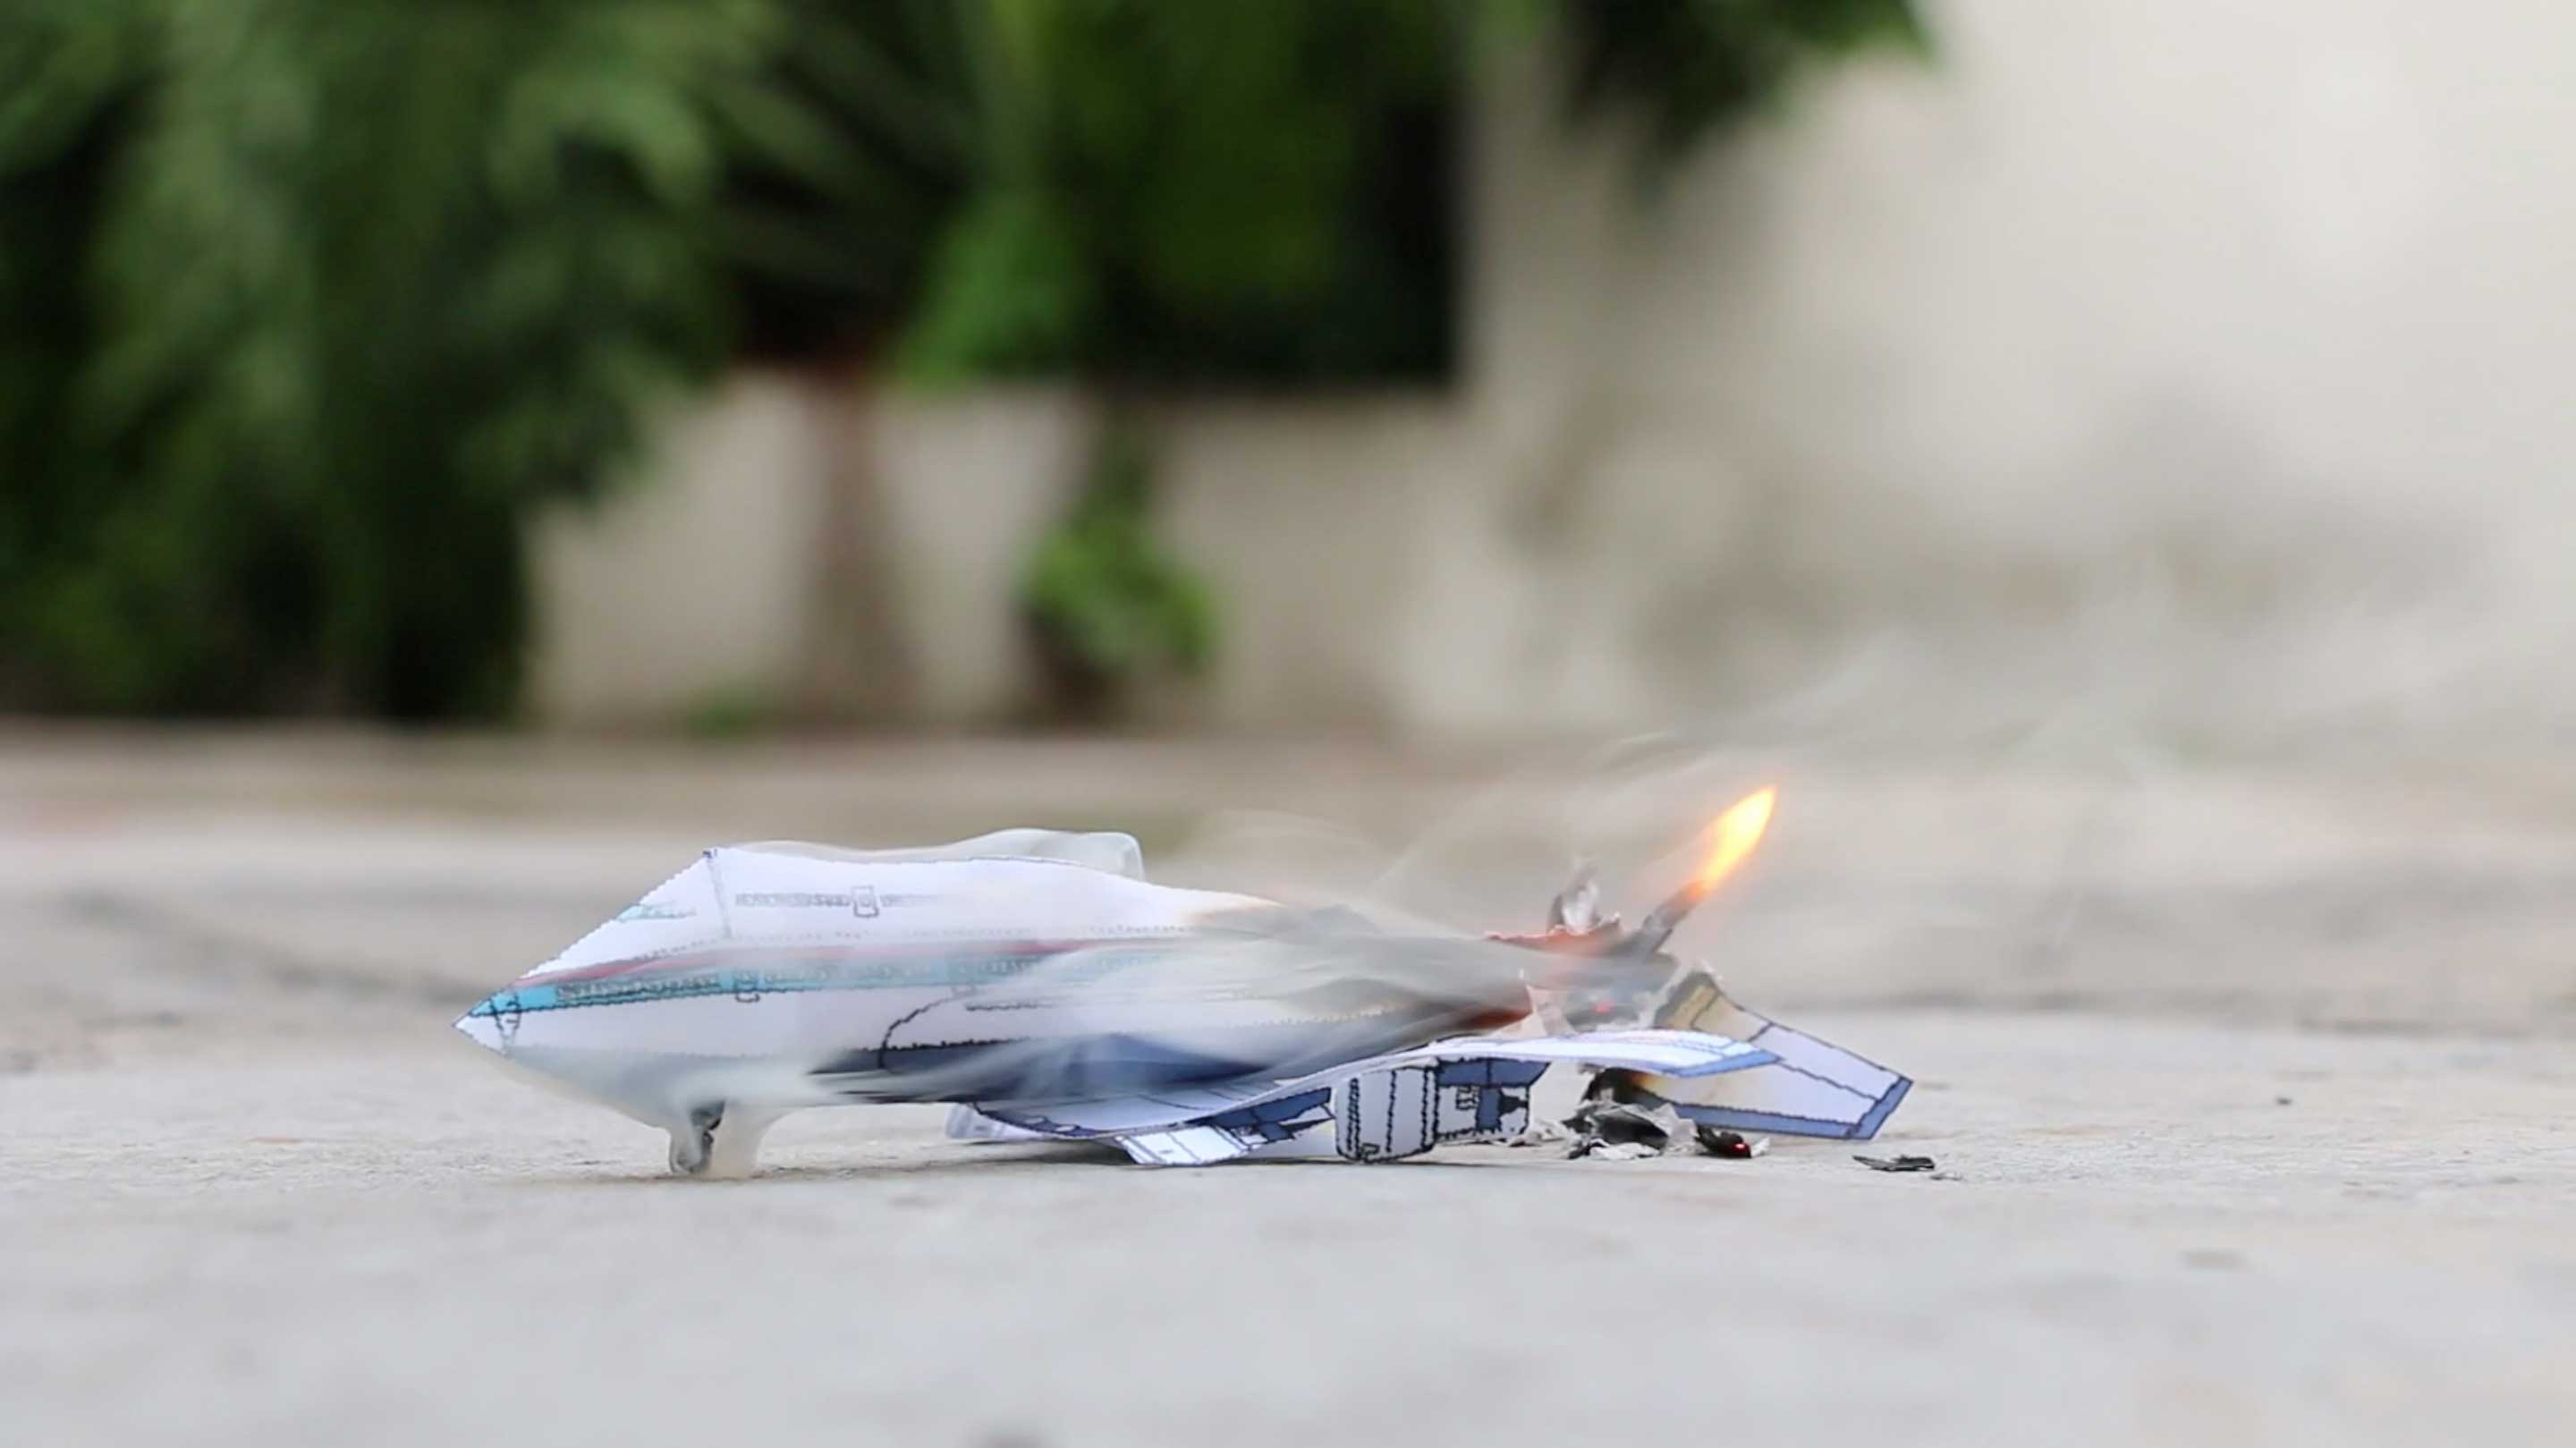 A detailed paper airplane set ablaze, with a small flame at its end.